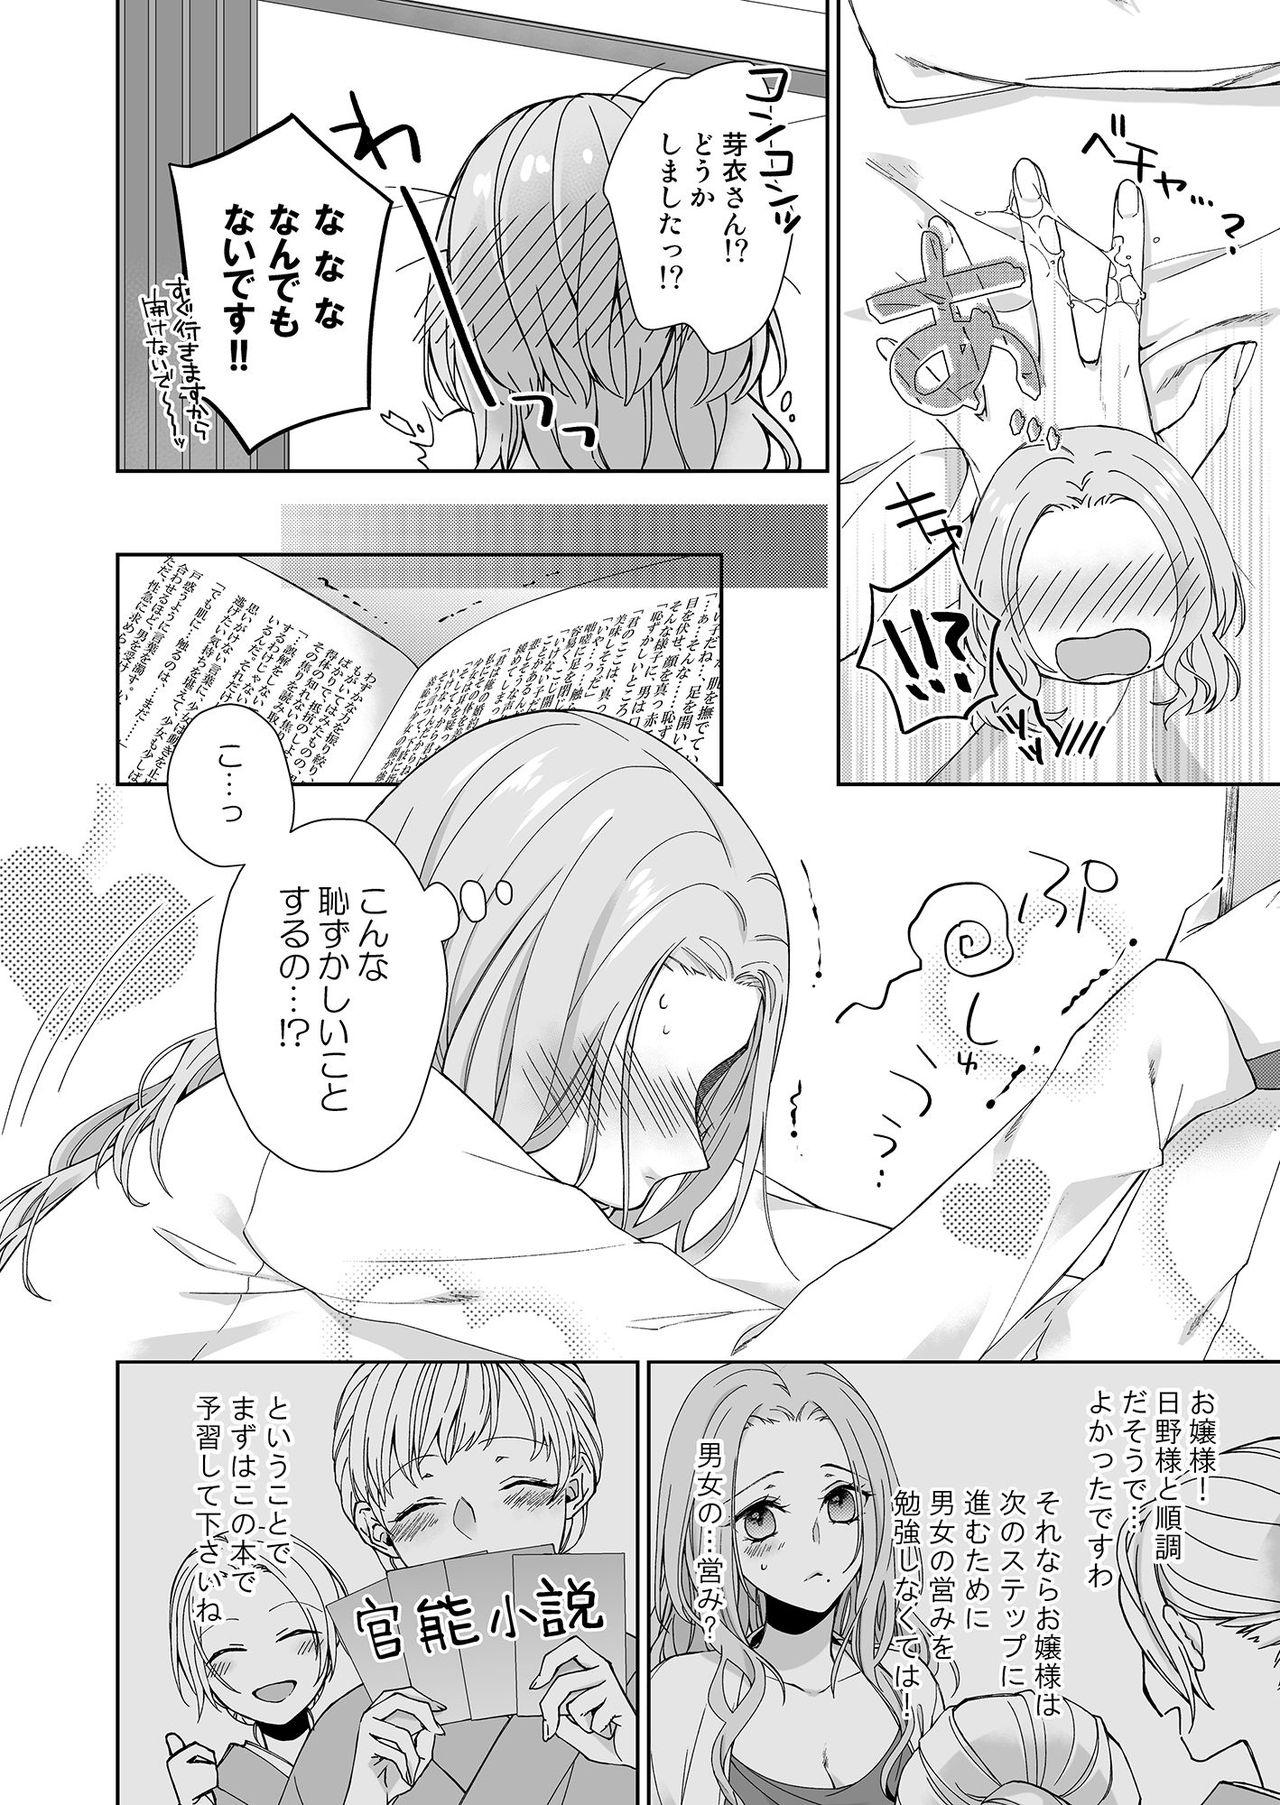 Pounding 俺のためだけに鳴いて？ 第3-10話 Comendo - Page 8